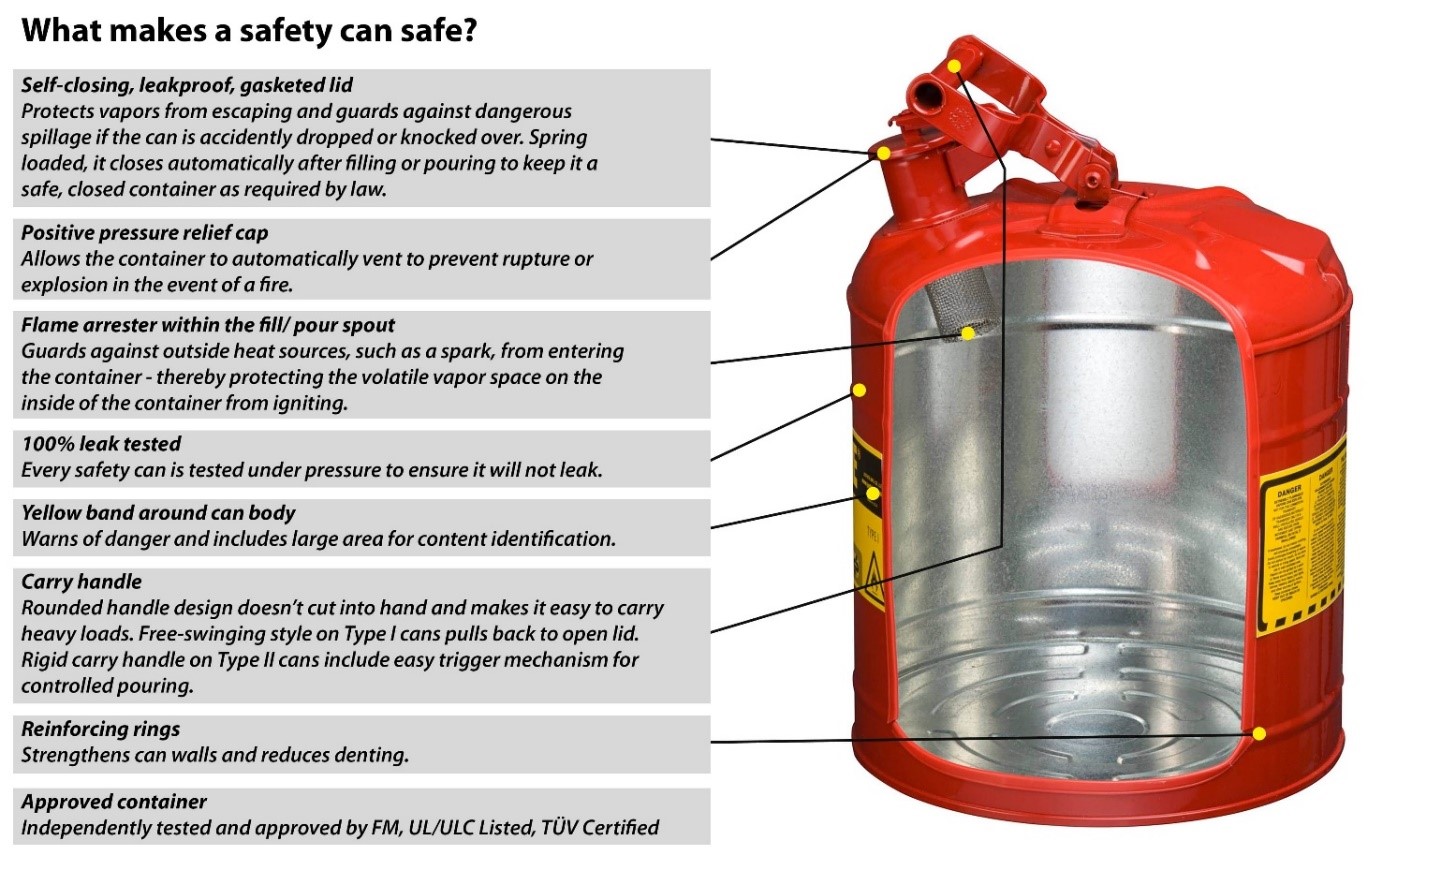 What makes a safety can safe?